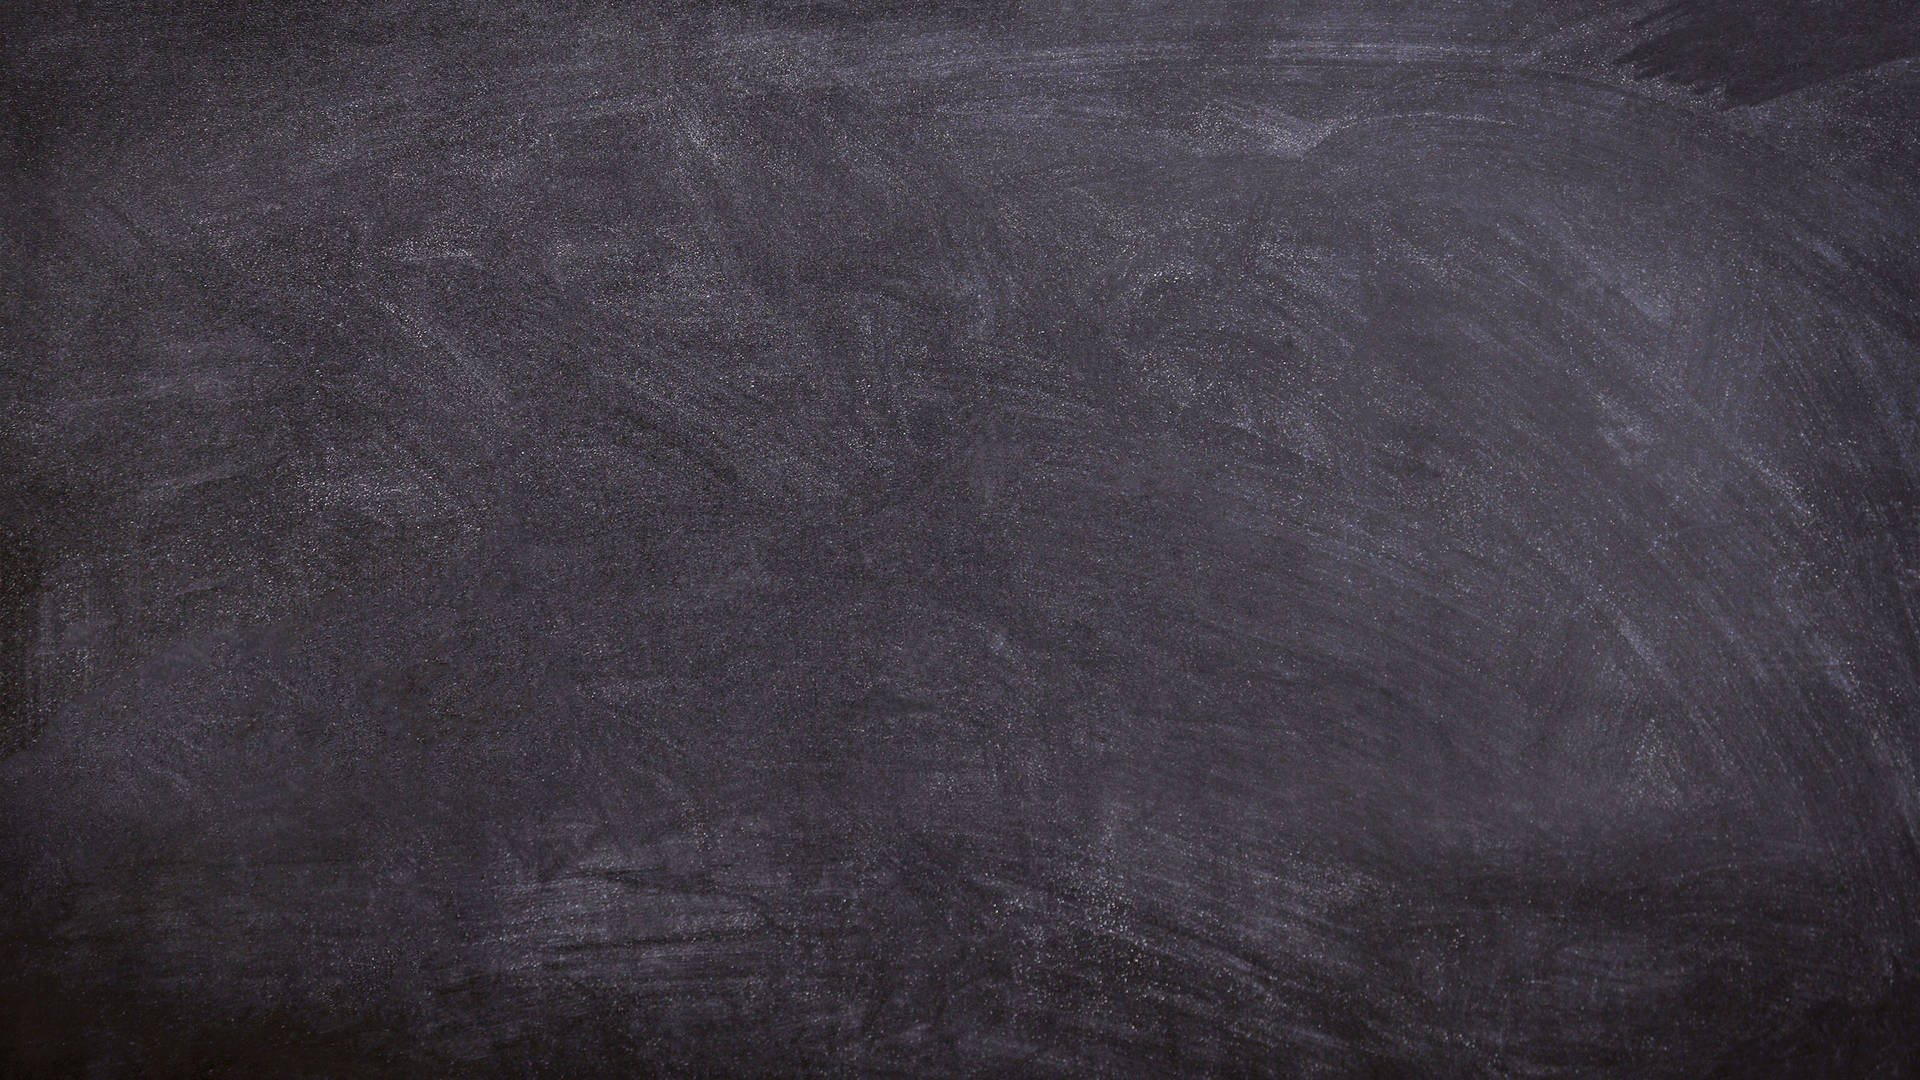 "Weathered Chalkboard with White Smudges" Wallpaper